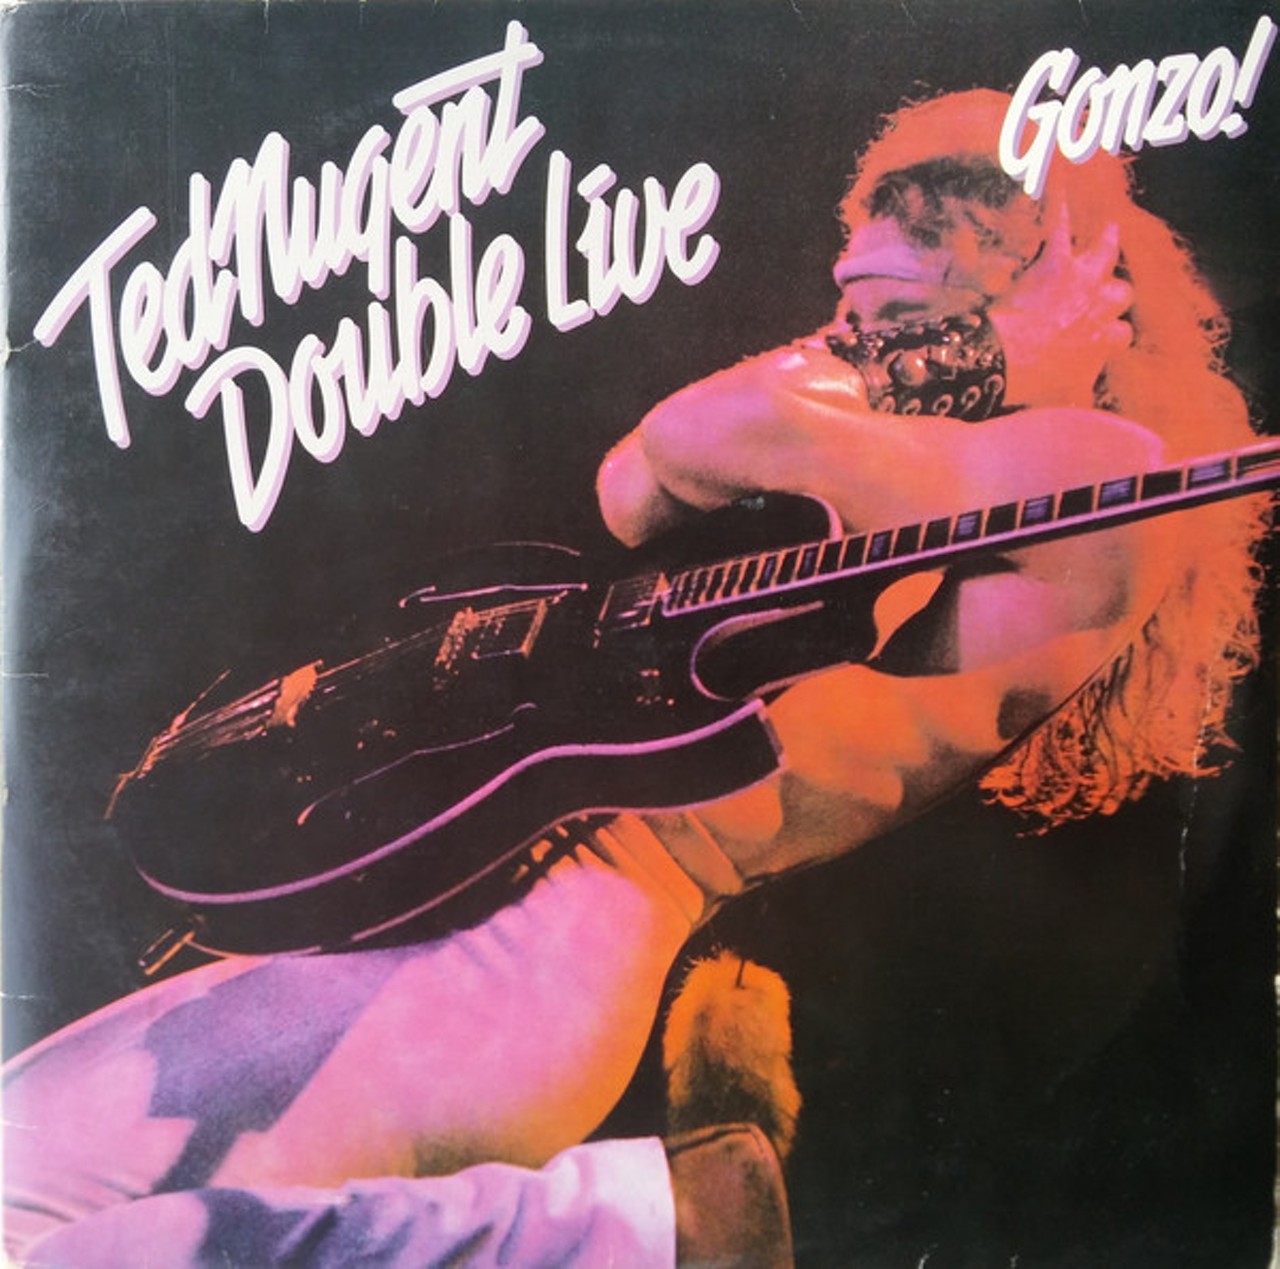 Ted Nugent: "Double Live Gonzo!"
Before the Nuge kept his career on life support by courting controversy with racist and COVID-denying mouthfarts, he was a shit-hot guitarist and quite an arena rock showman, as evidenced by this live recording, some of which was captured in the Alamo City. Best moment: Nugent screams "San Antonio! San Antonio! San Antonio!" and someone in the crowd hollers back "Suck my bone-i-o!"
Photo via Epic Records